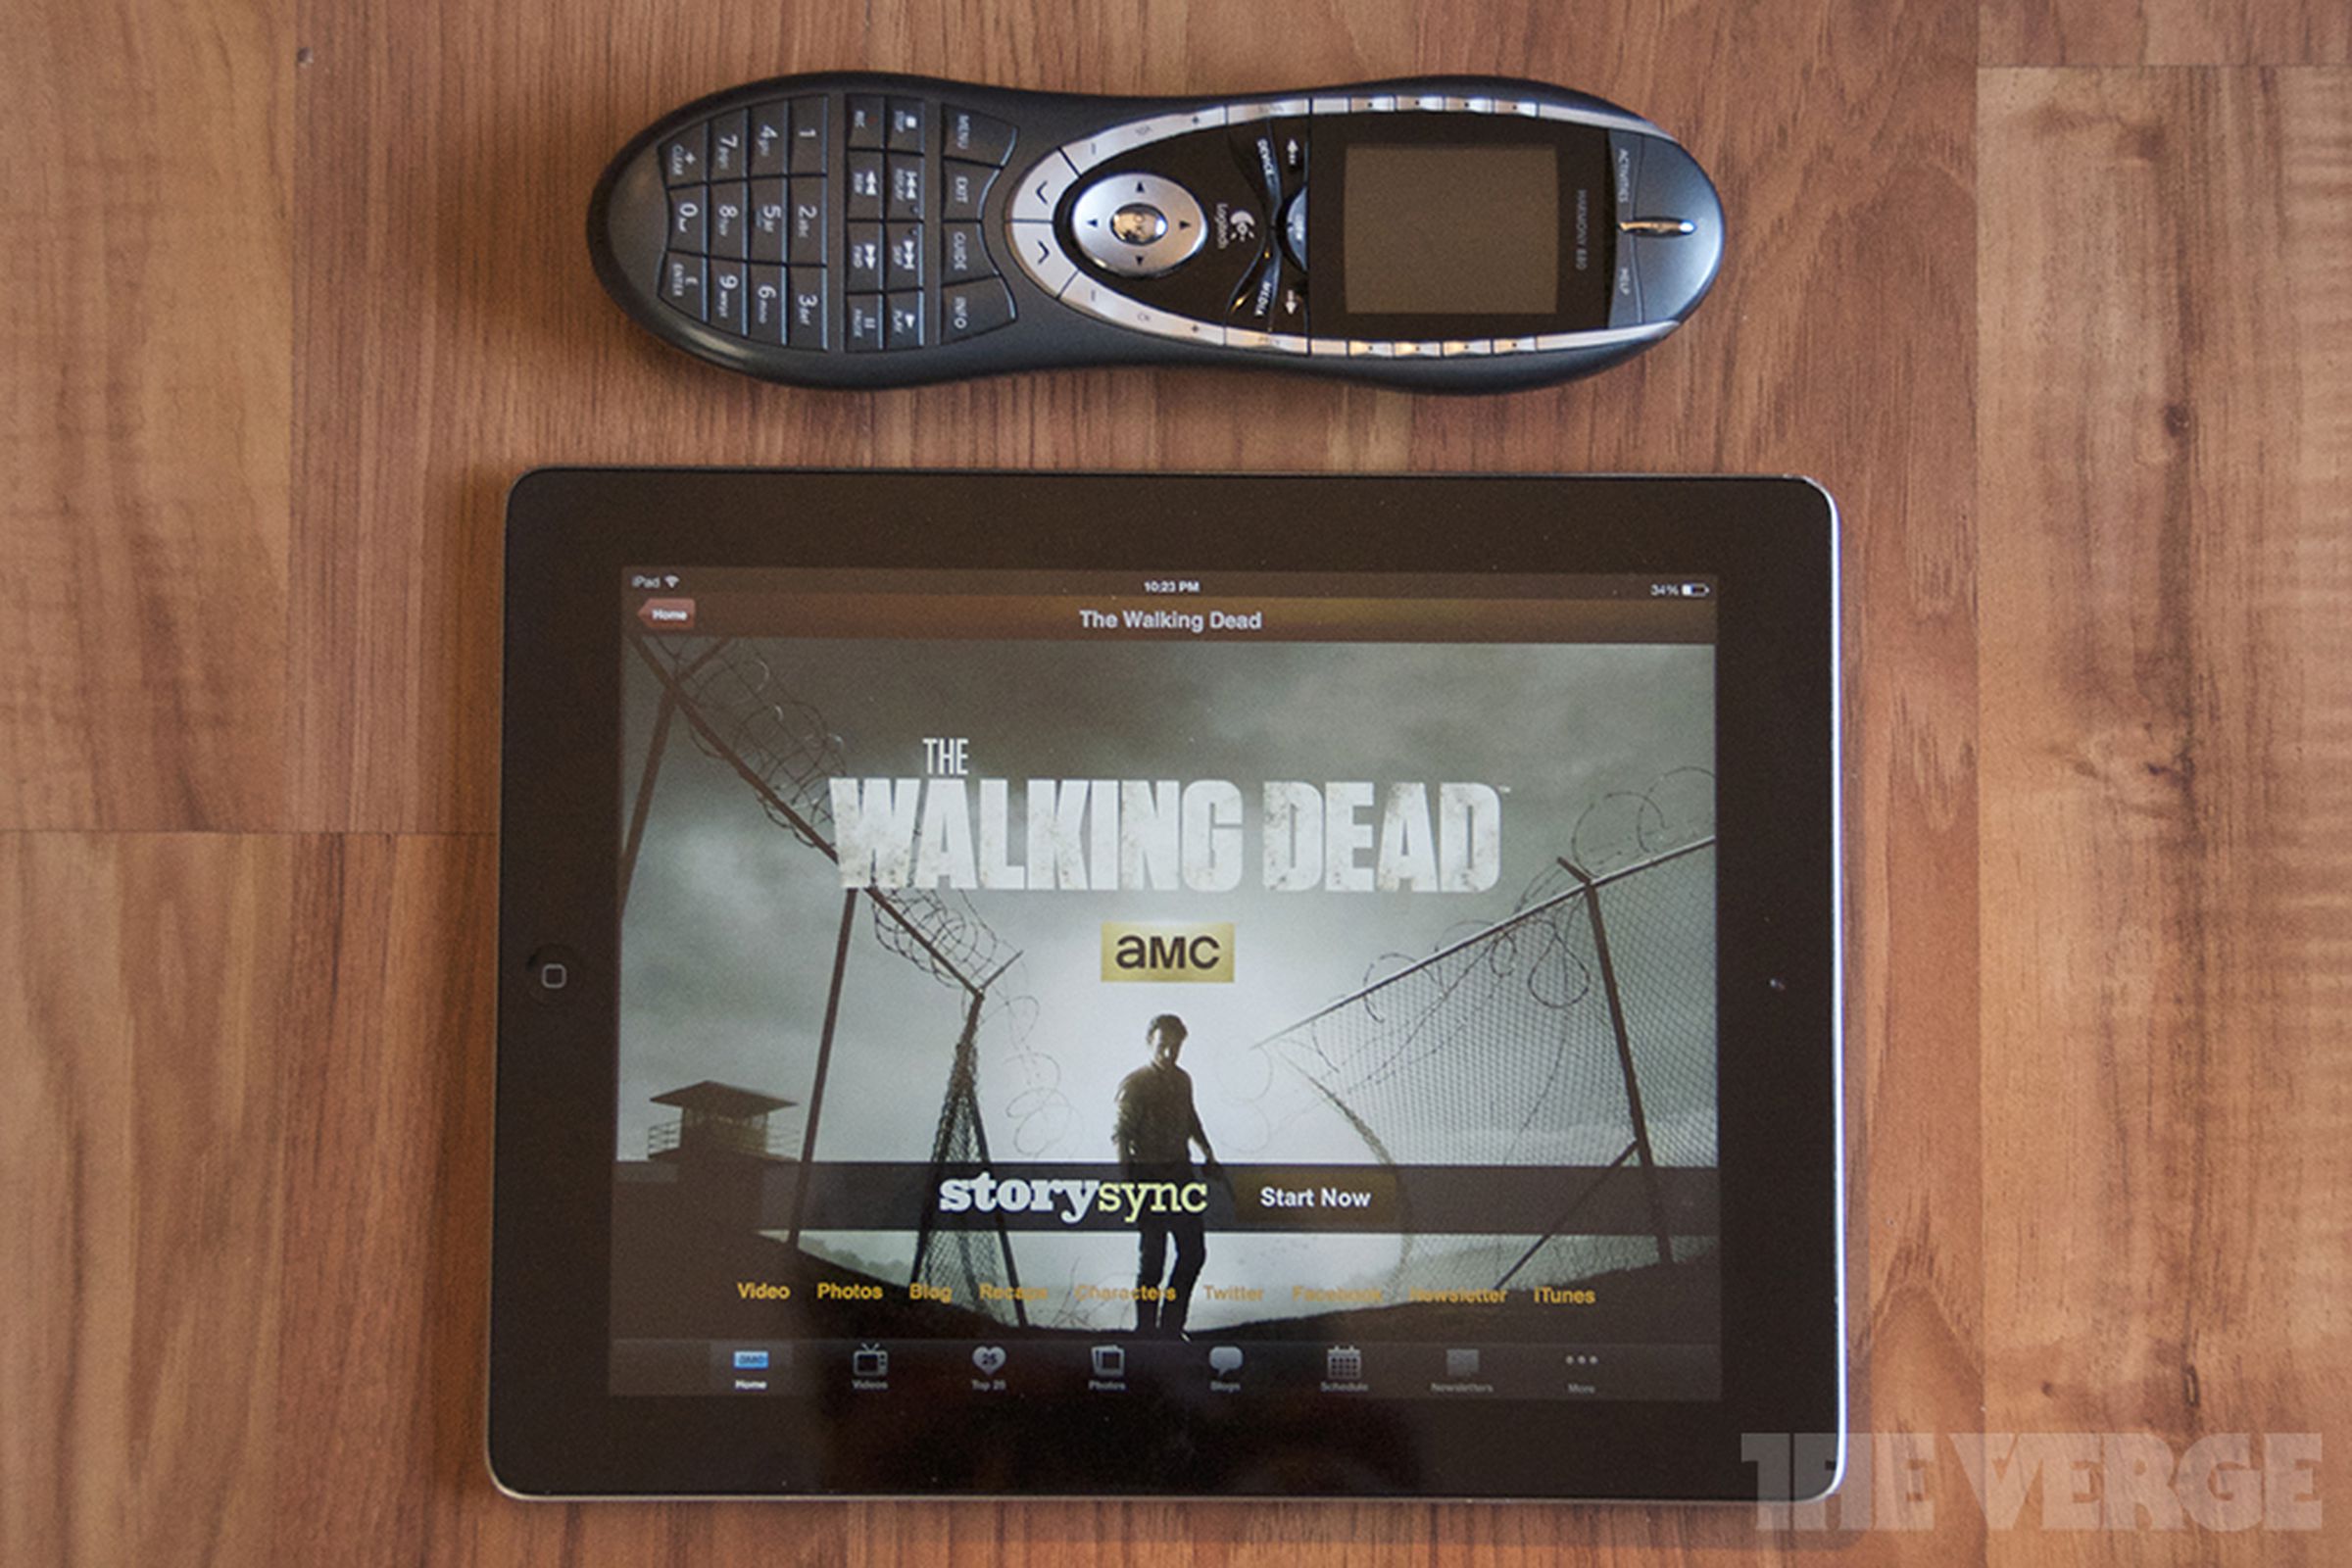 The Walking Dead Story Sync